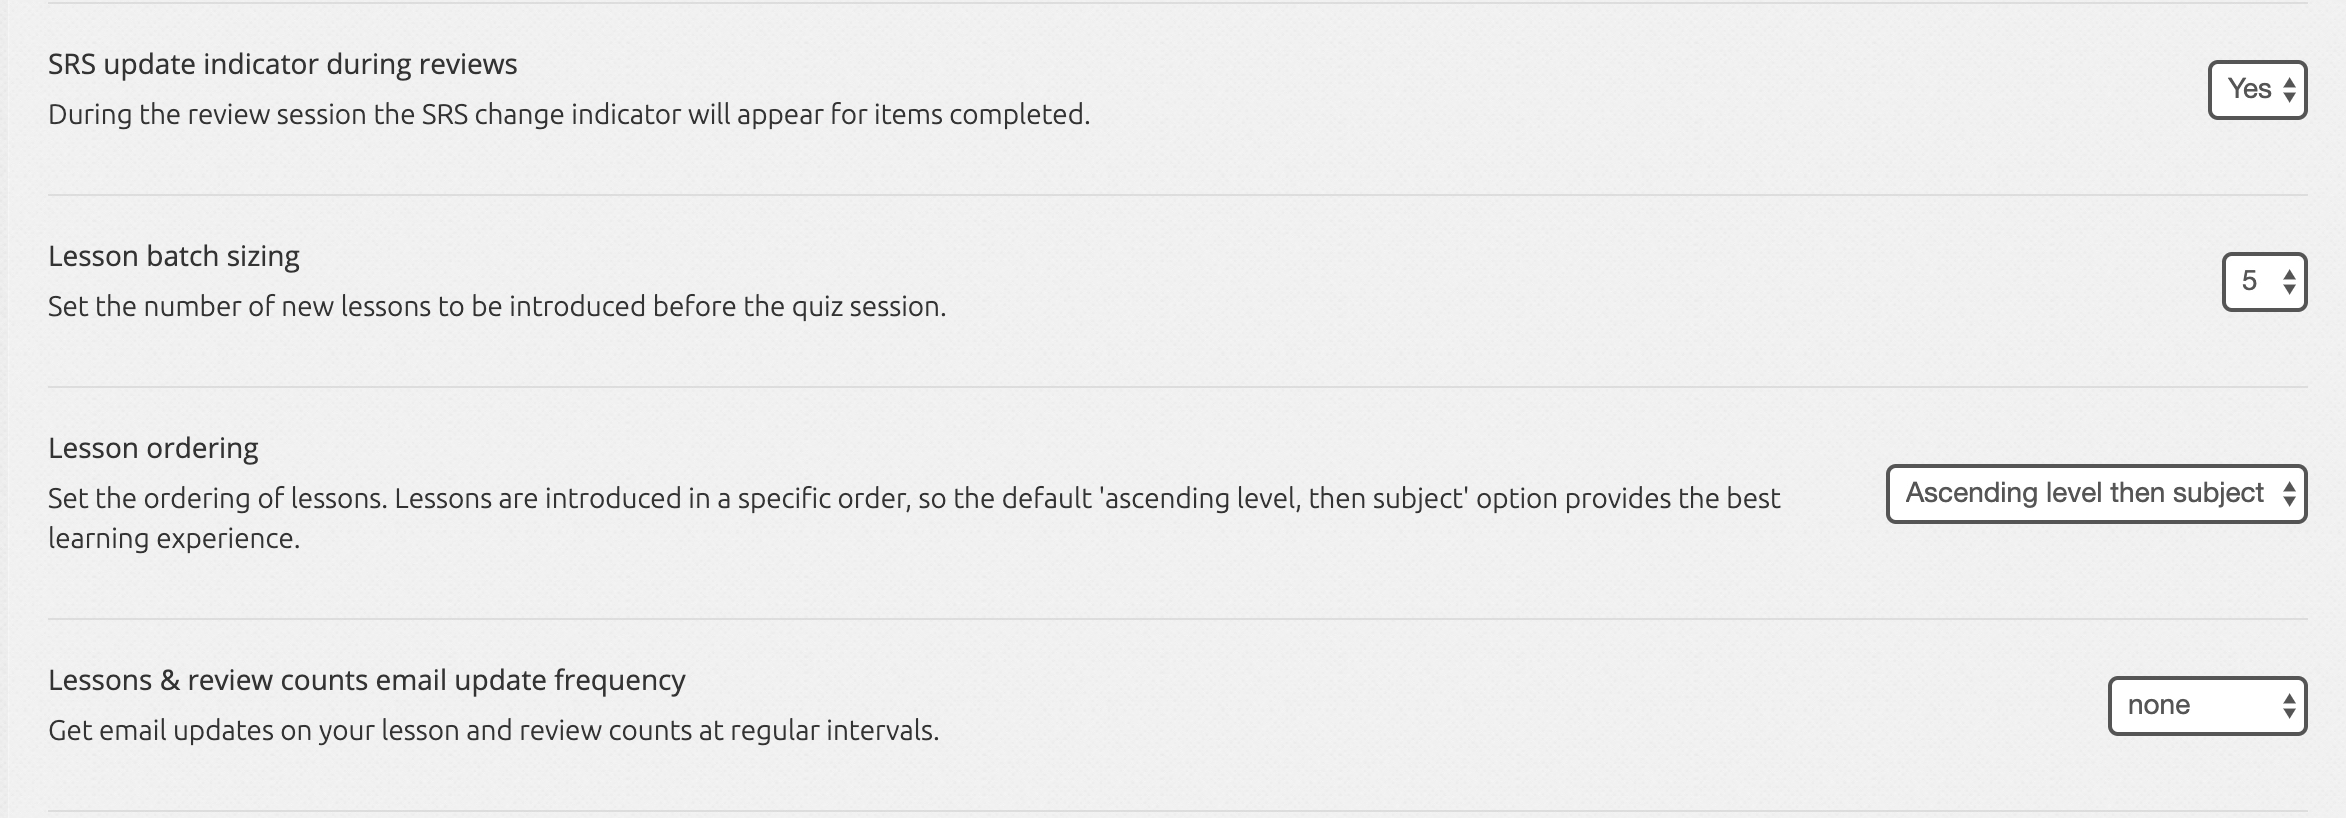 Lessons and Reviews Settings